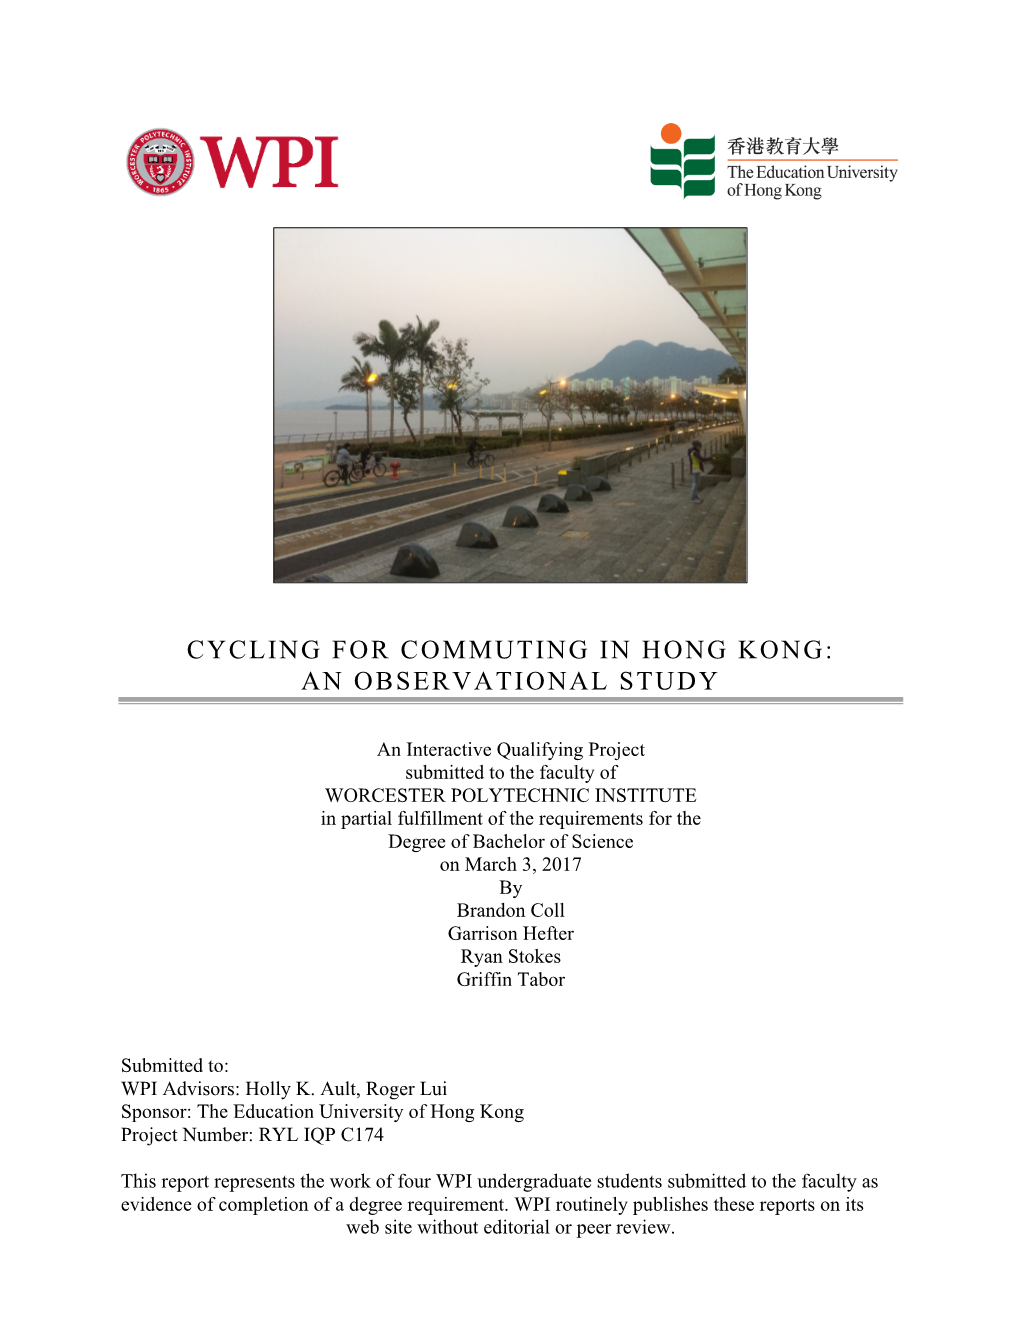 Cycling for Commuting in Hong Kong: an Observational Study